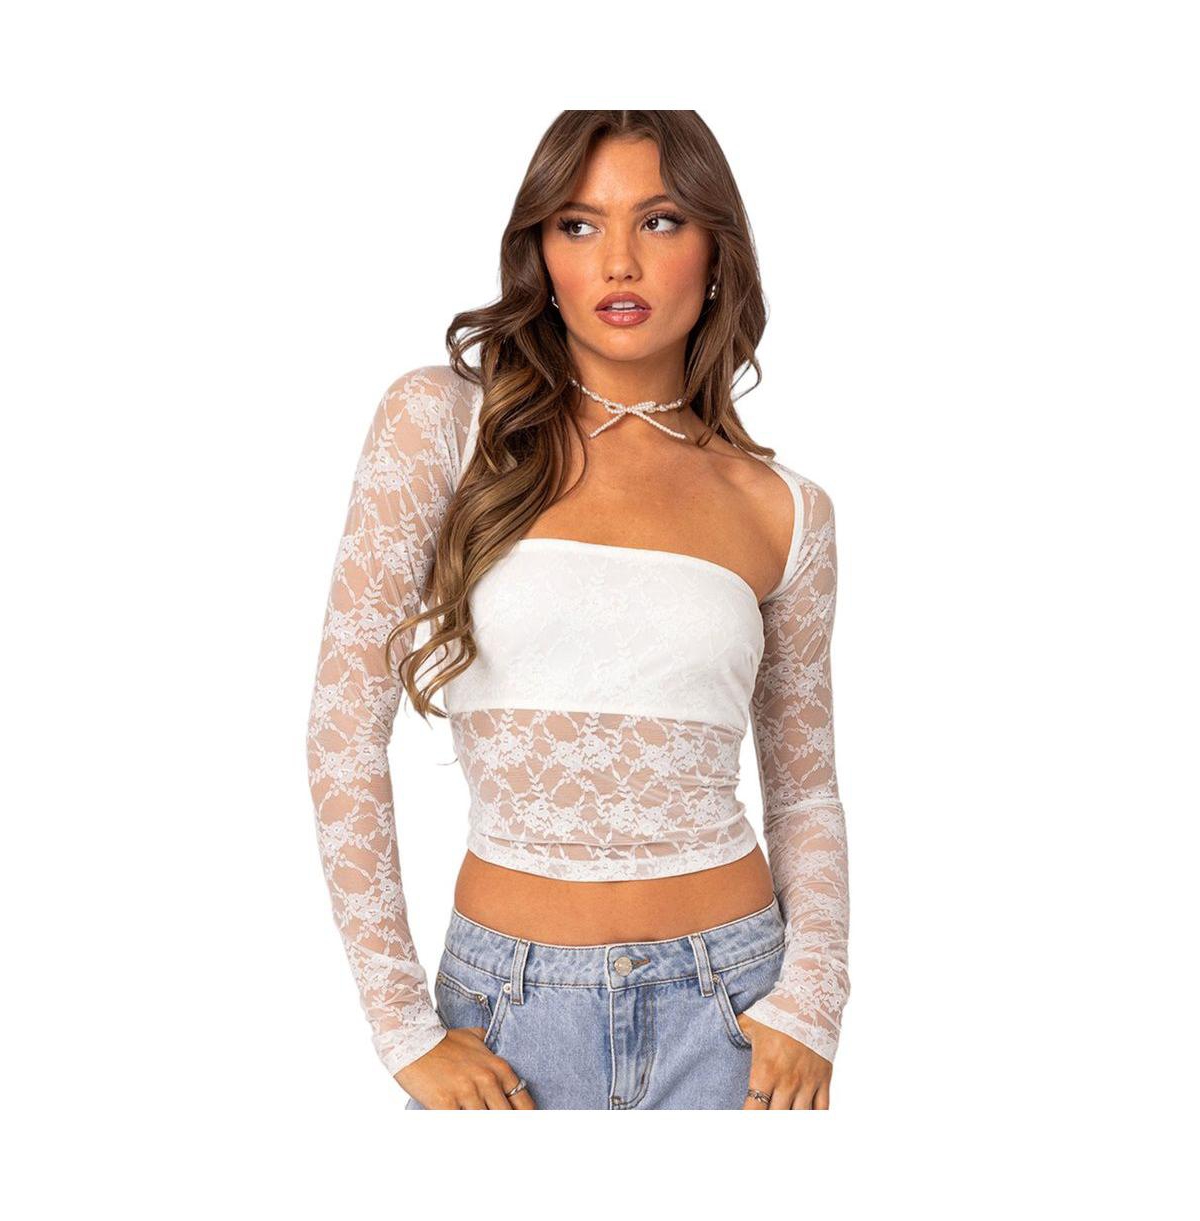 EDIKTED WOMEN'S ADDISON SHEER LACE TWO PIECE TOP